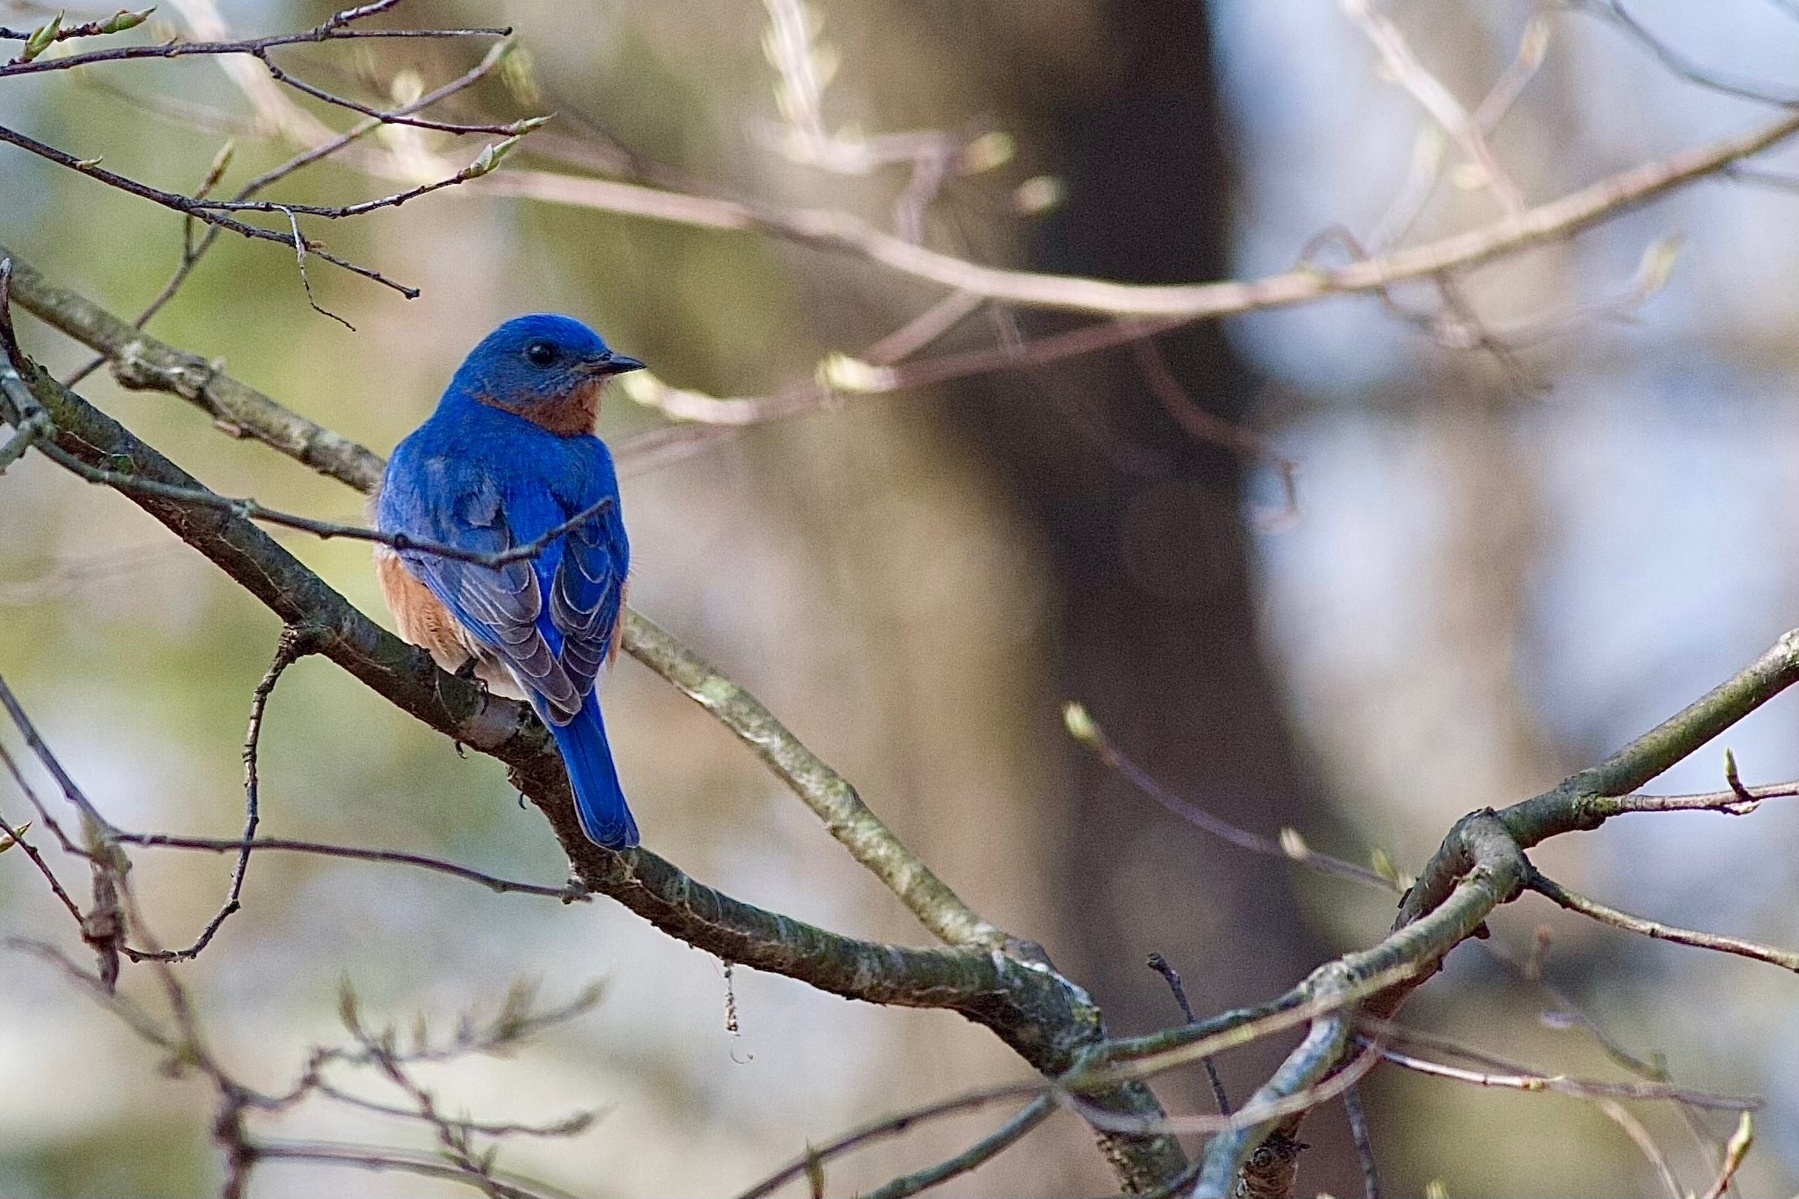 A Bluebird perched on a branch with it's back to the camera, it's feathers are vibrant blue with black tips. It's brown neck is visible as it's looking to the side. The background is blurred forest.